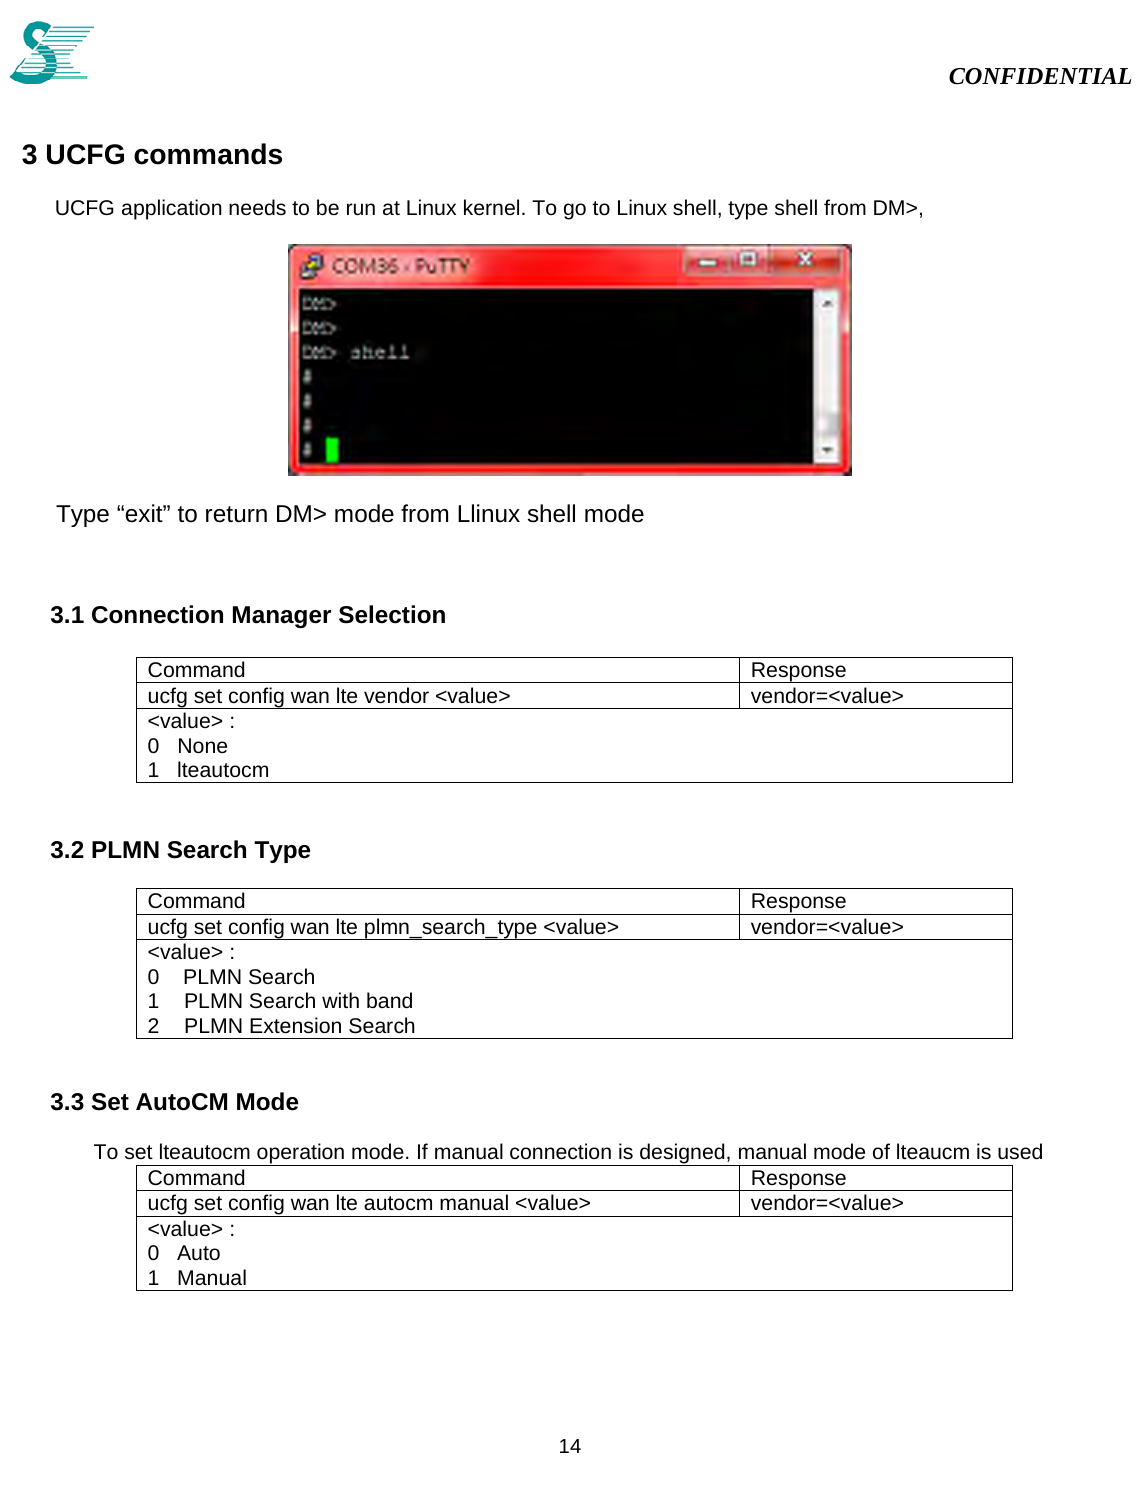                                                                                                                                                                                             CONFIDENTIAL           14   3 UCFG commands          UCFG application needs to be run at Linux kernel. To go to Linux shell, type shell from DM&gt;,     Type “exit” to return DM&gt; mode from Llinux shell mode   3.1 Connection Manager Selection  Command Response ucfg set config wan lte vendor &lt;value&gt;  vendor=&lt;value&gt; &lt;value&gt; : 0   None 1   lteautocm  3.2 PLMN Search Type  Command Response ucfg set config wan lte plmn_search_type &lt;value&gt;  vendor=&lt;value&gt; &lt;value&gt; : 0    PLMN Search 1  PLMN Search with band 2  PLMN Extension Search   3.3 Set AutoCM Mode  To set lteautocm operation mode. If manual connection is designed, manual mode of lteaucm is used Command Response ucfg set config wan lte autocm manual &lt;value&gt;  vendor=&lt;value&gt; &lt;value&gt; : 0   Auto 1   Manual  